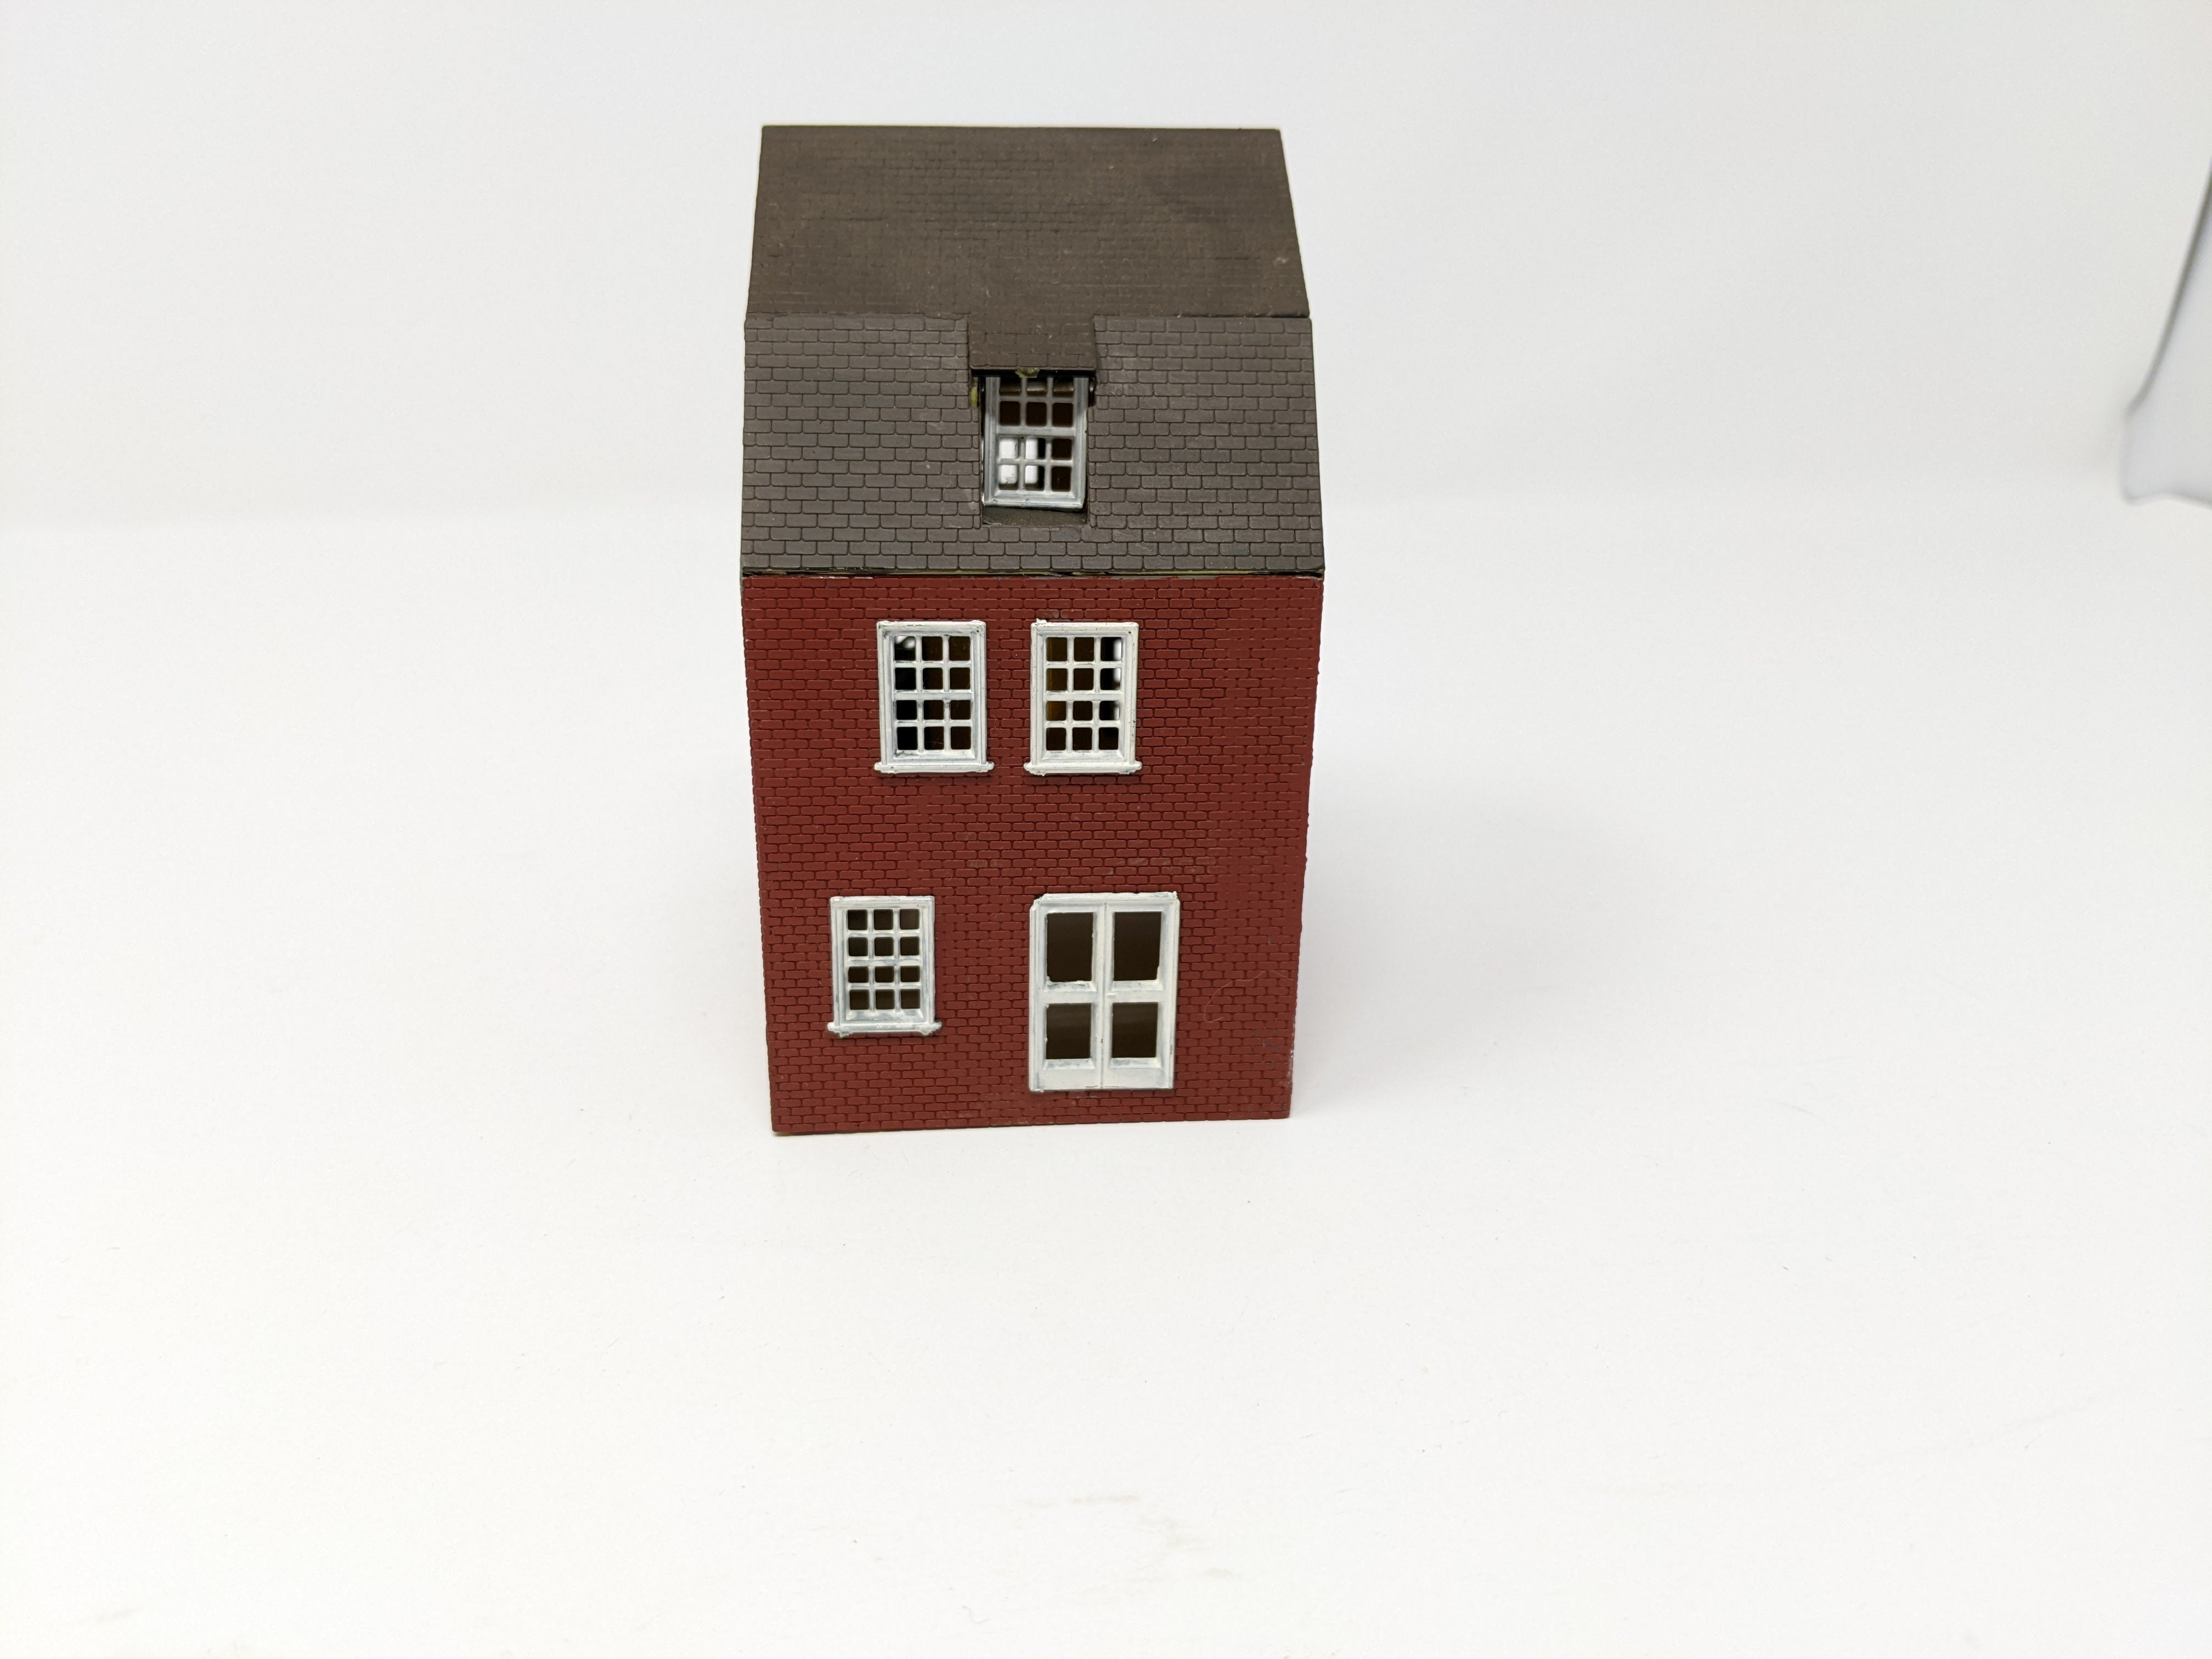 USED HO Scale, Brick House Building